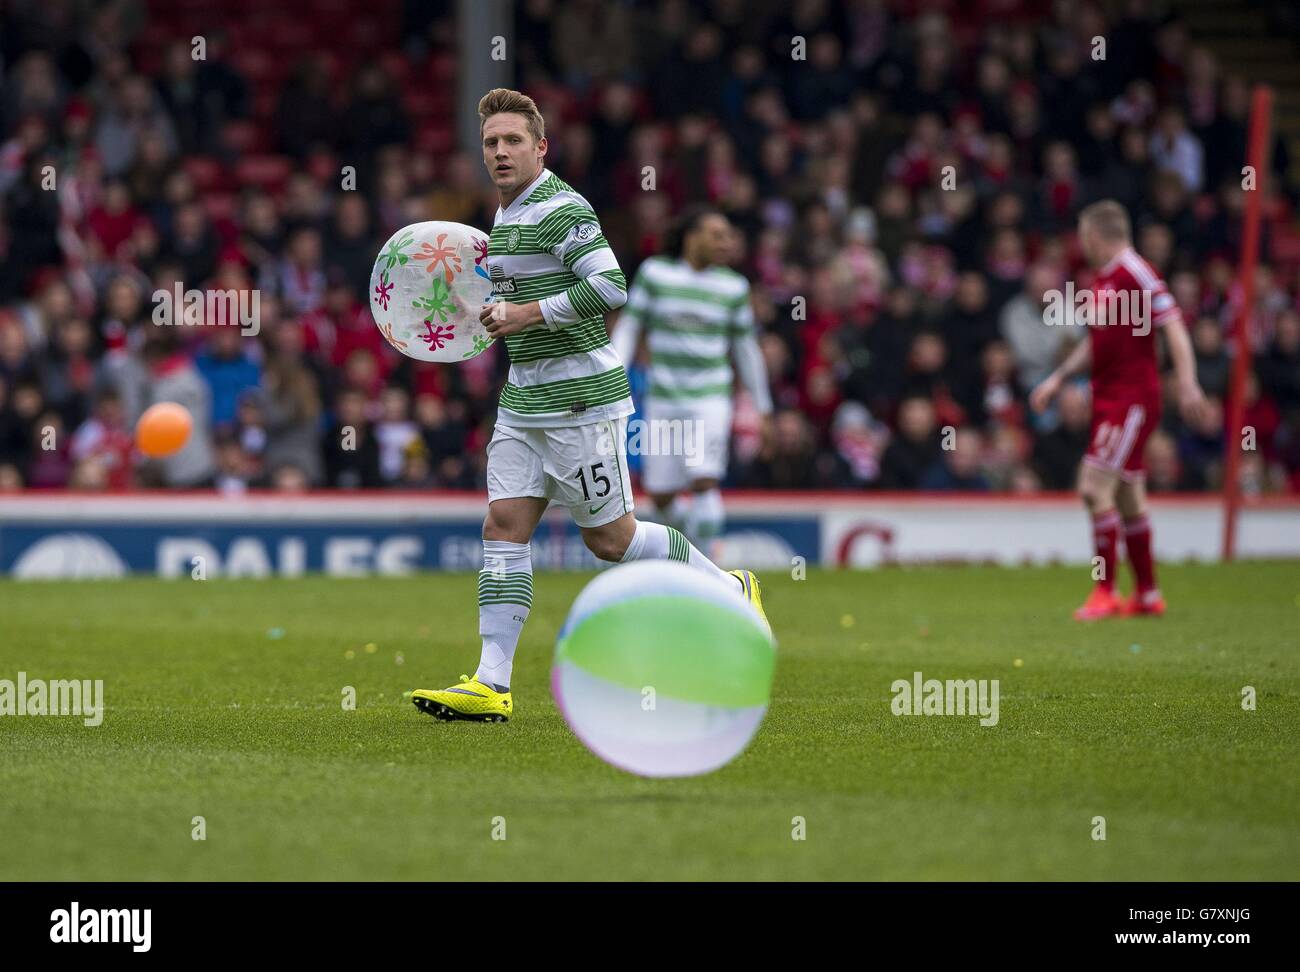 Celtics Kris Comons clears a beachball from the pitch during the Scottish Premiership match at Pittodrie Stadium, Aberdeen. Stock Photo